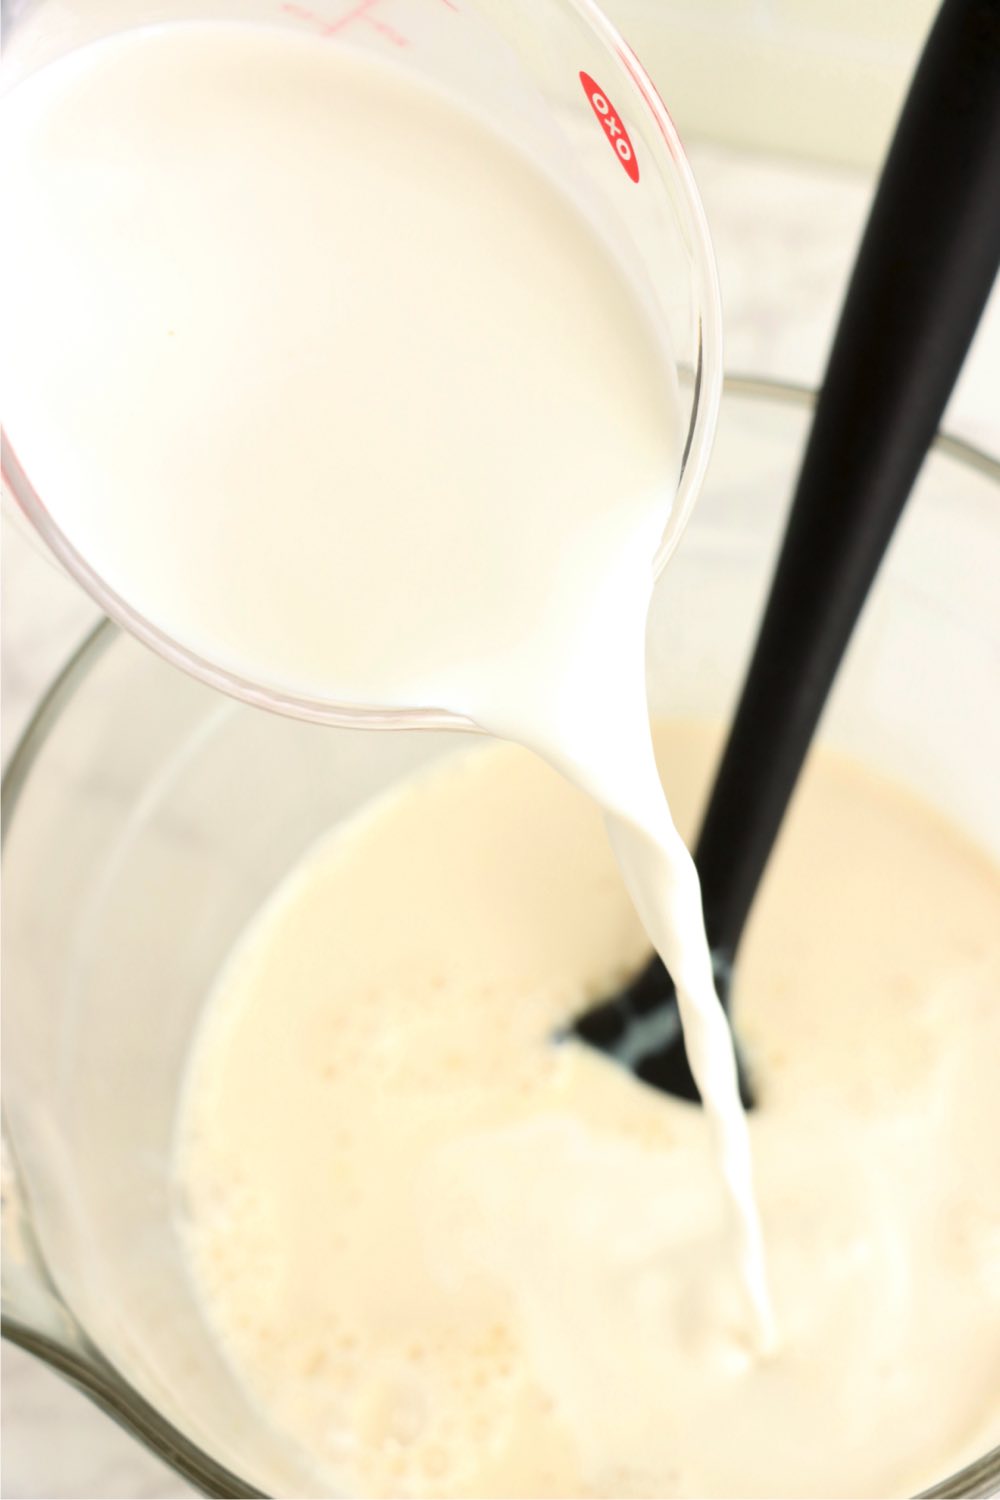 Pouring milk into a tres leches mixture